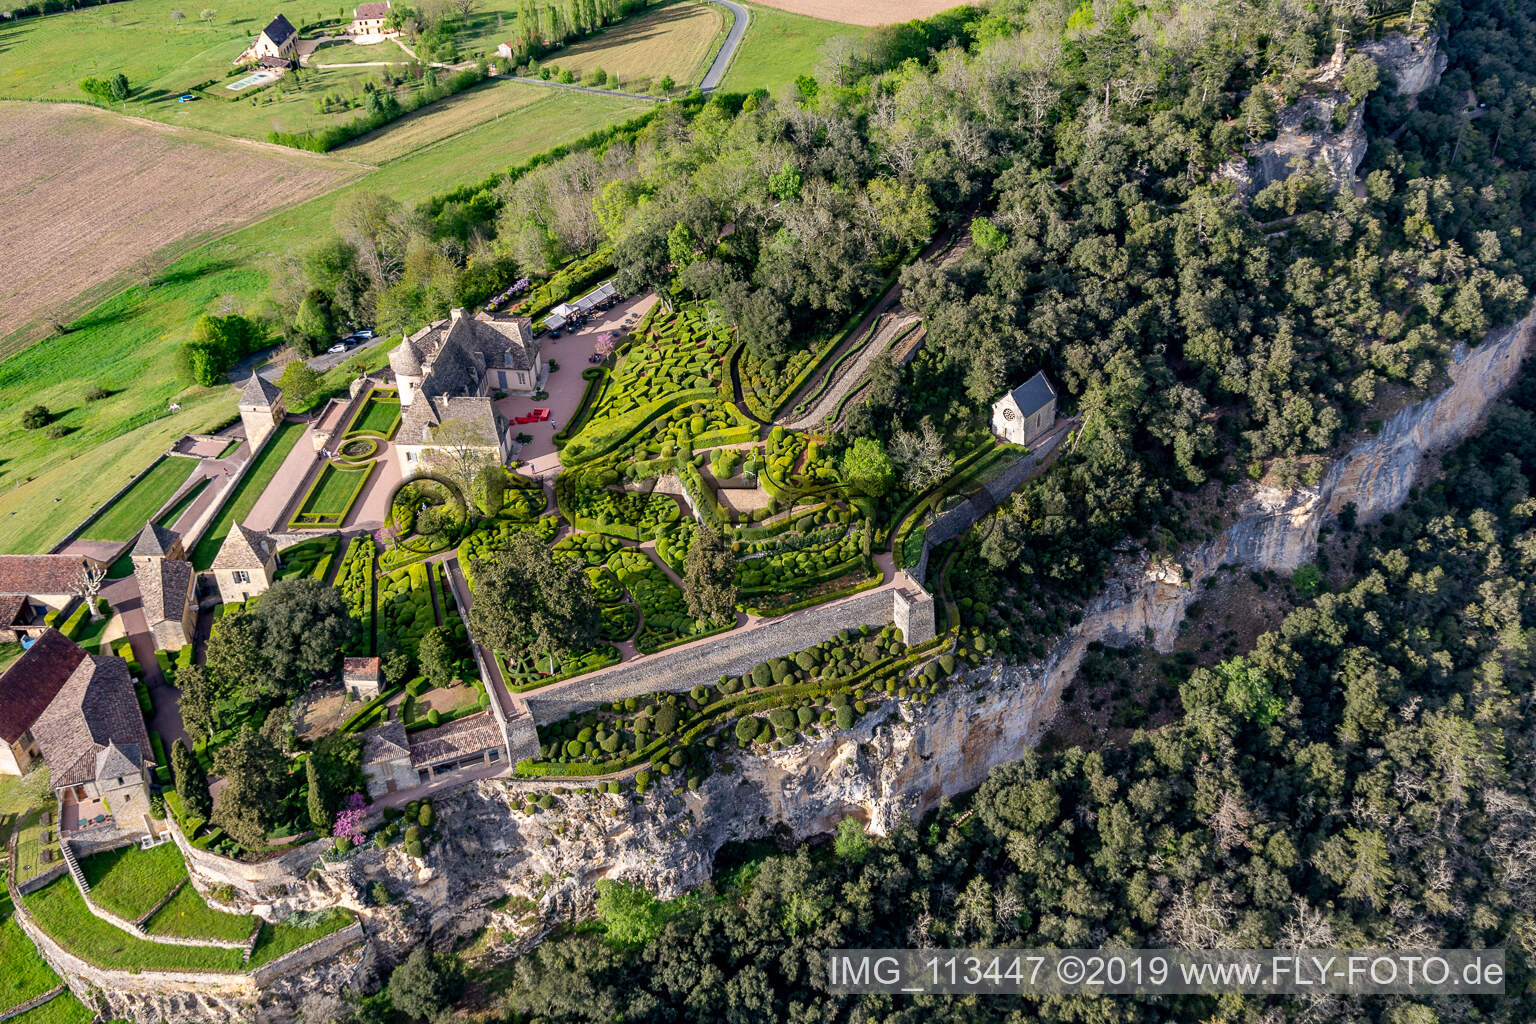 Aerial view of Park and gardenss of the castle Marqueyssac above the Dordogne in Vezac in Nouvelle-Aquitaine, France